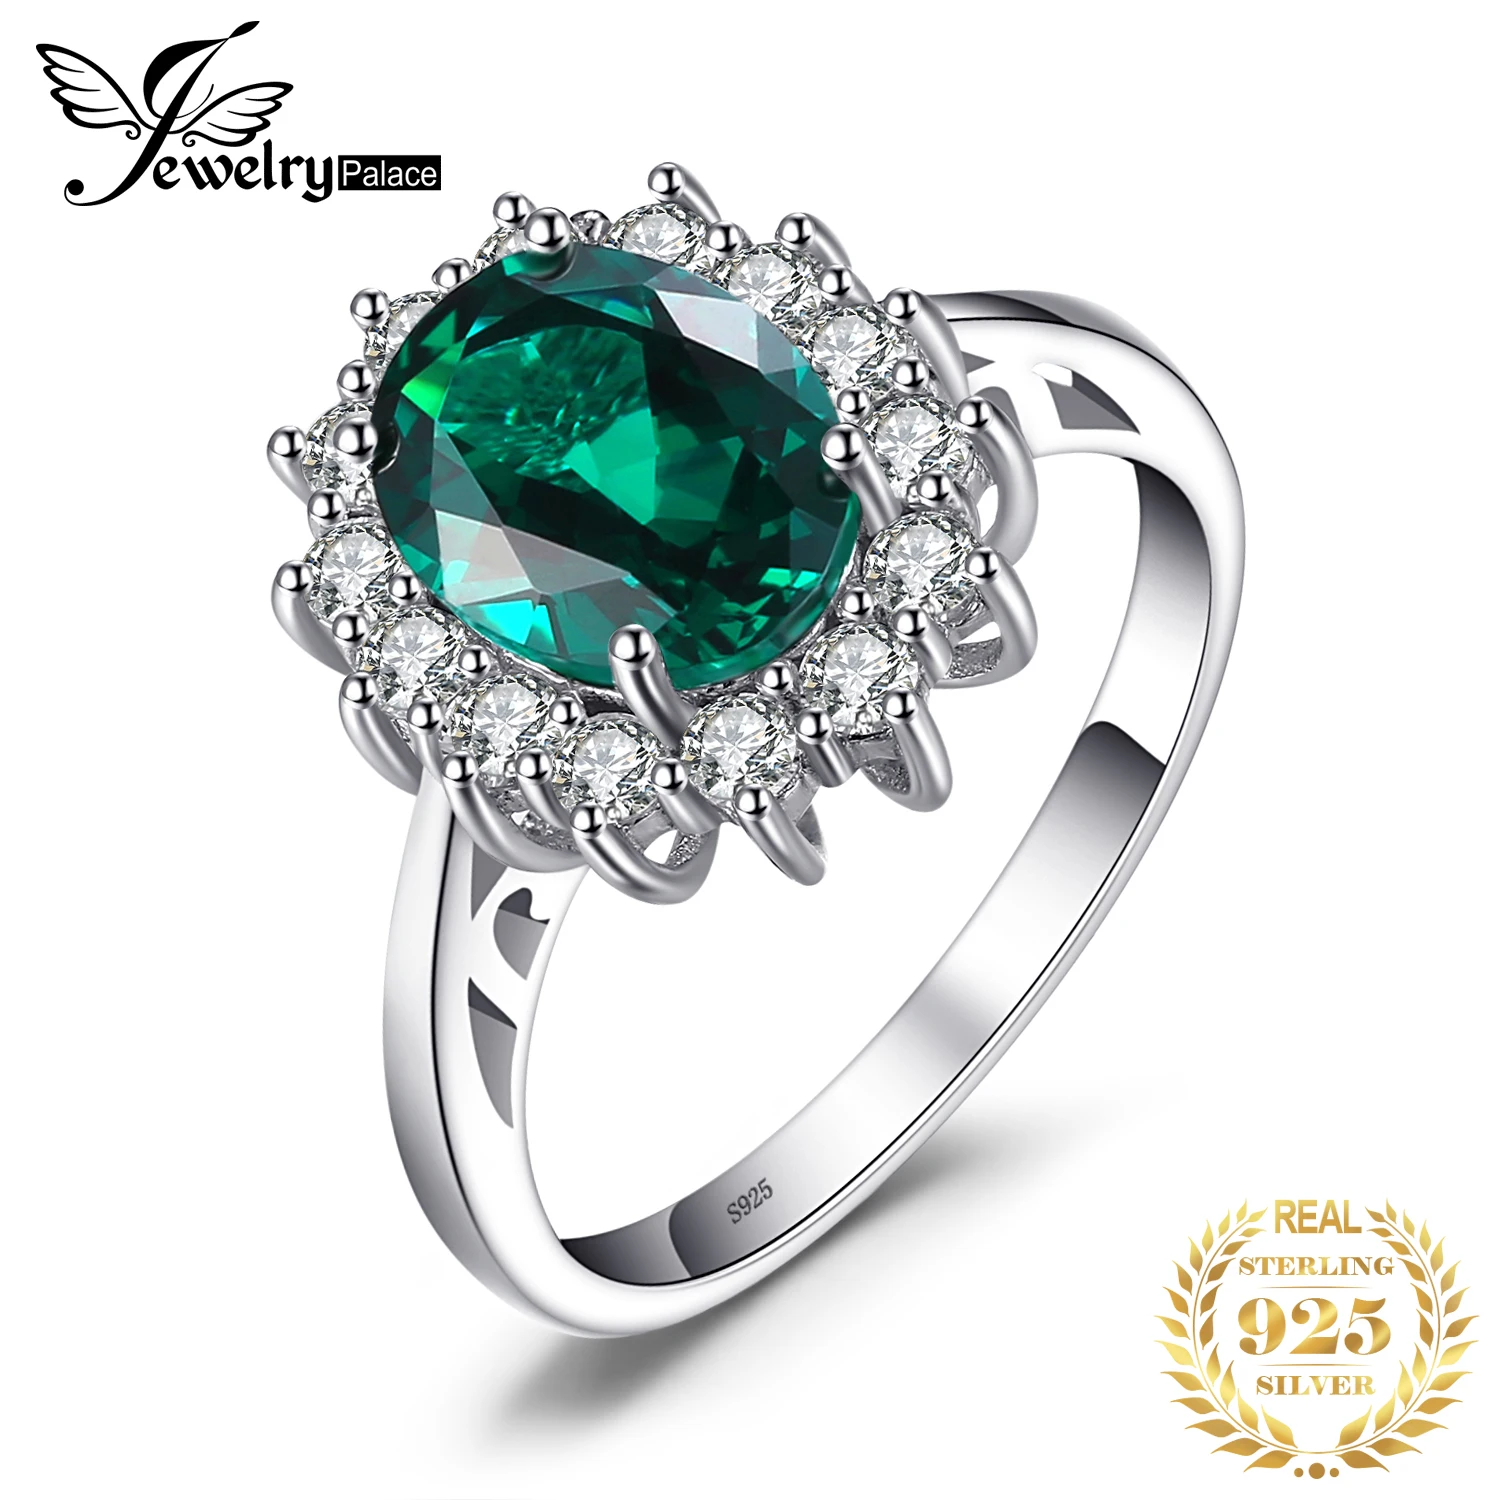 

JewelryPalace Princess Diana Simulated Green Emerald Engagement Ring Kate Middleton Crown 925 Sterling Silver Ring for Women